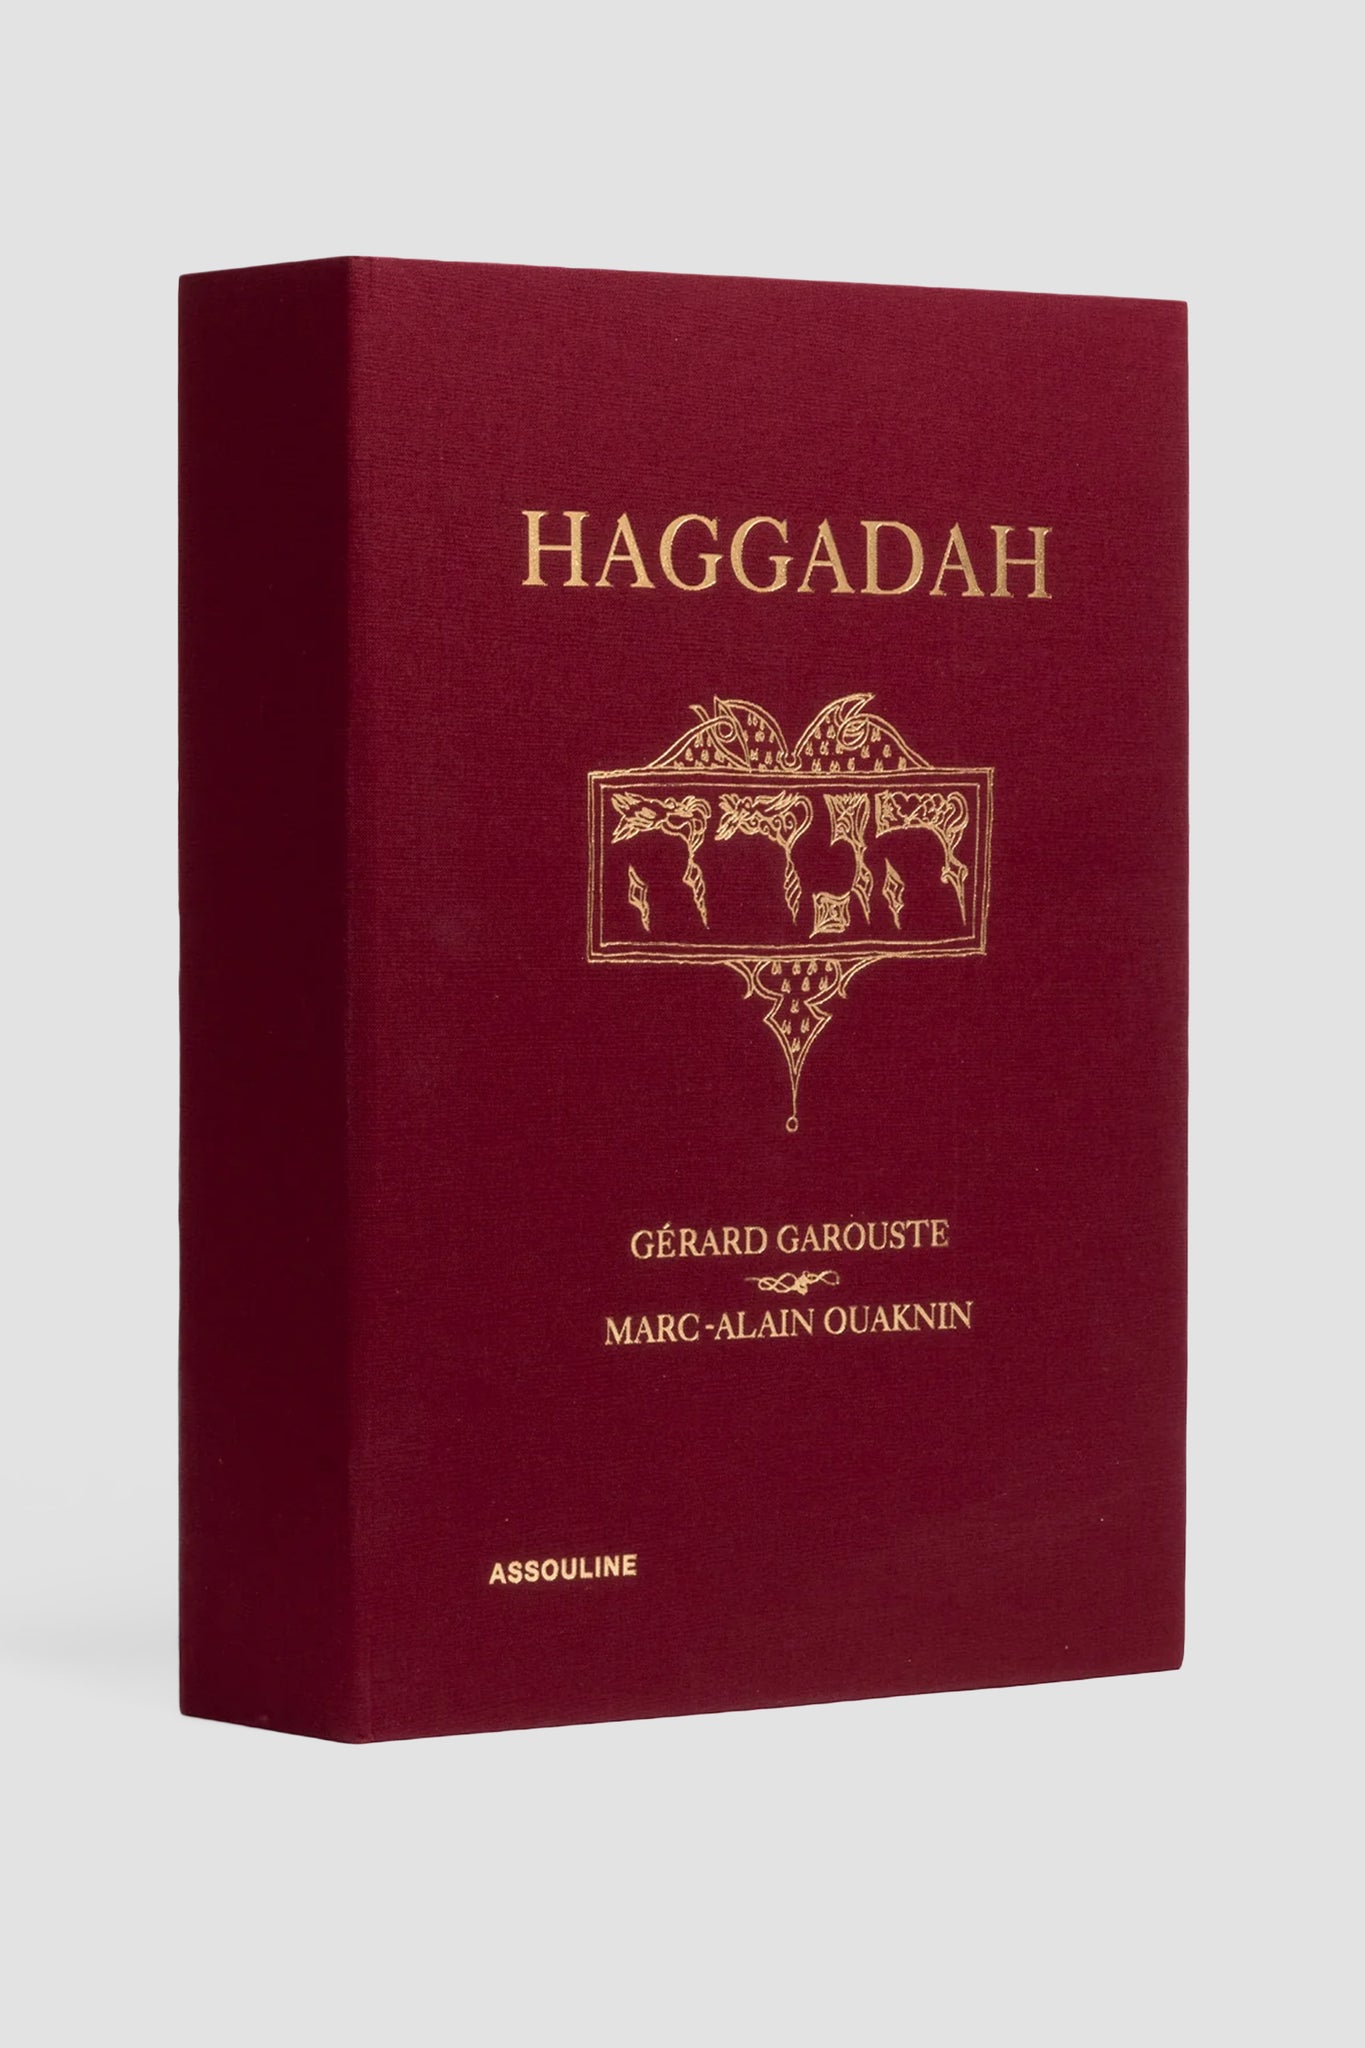 ASSOULINE Special Edition Haggadah Hardcover Book by Marc-Alain Ouaknin